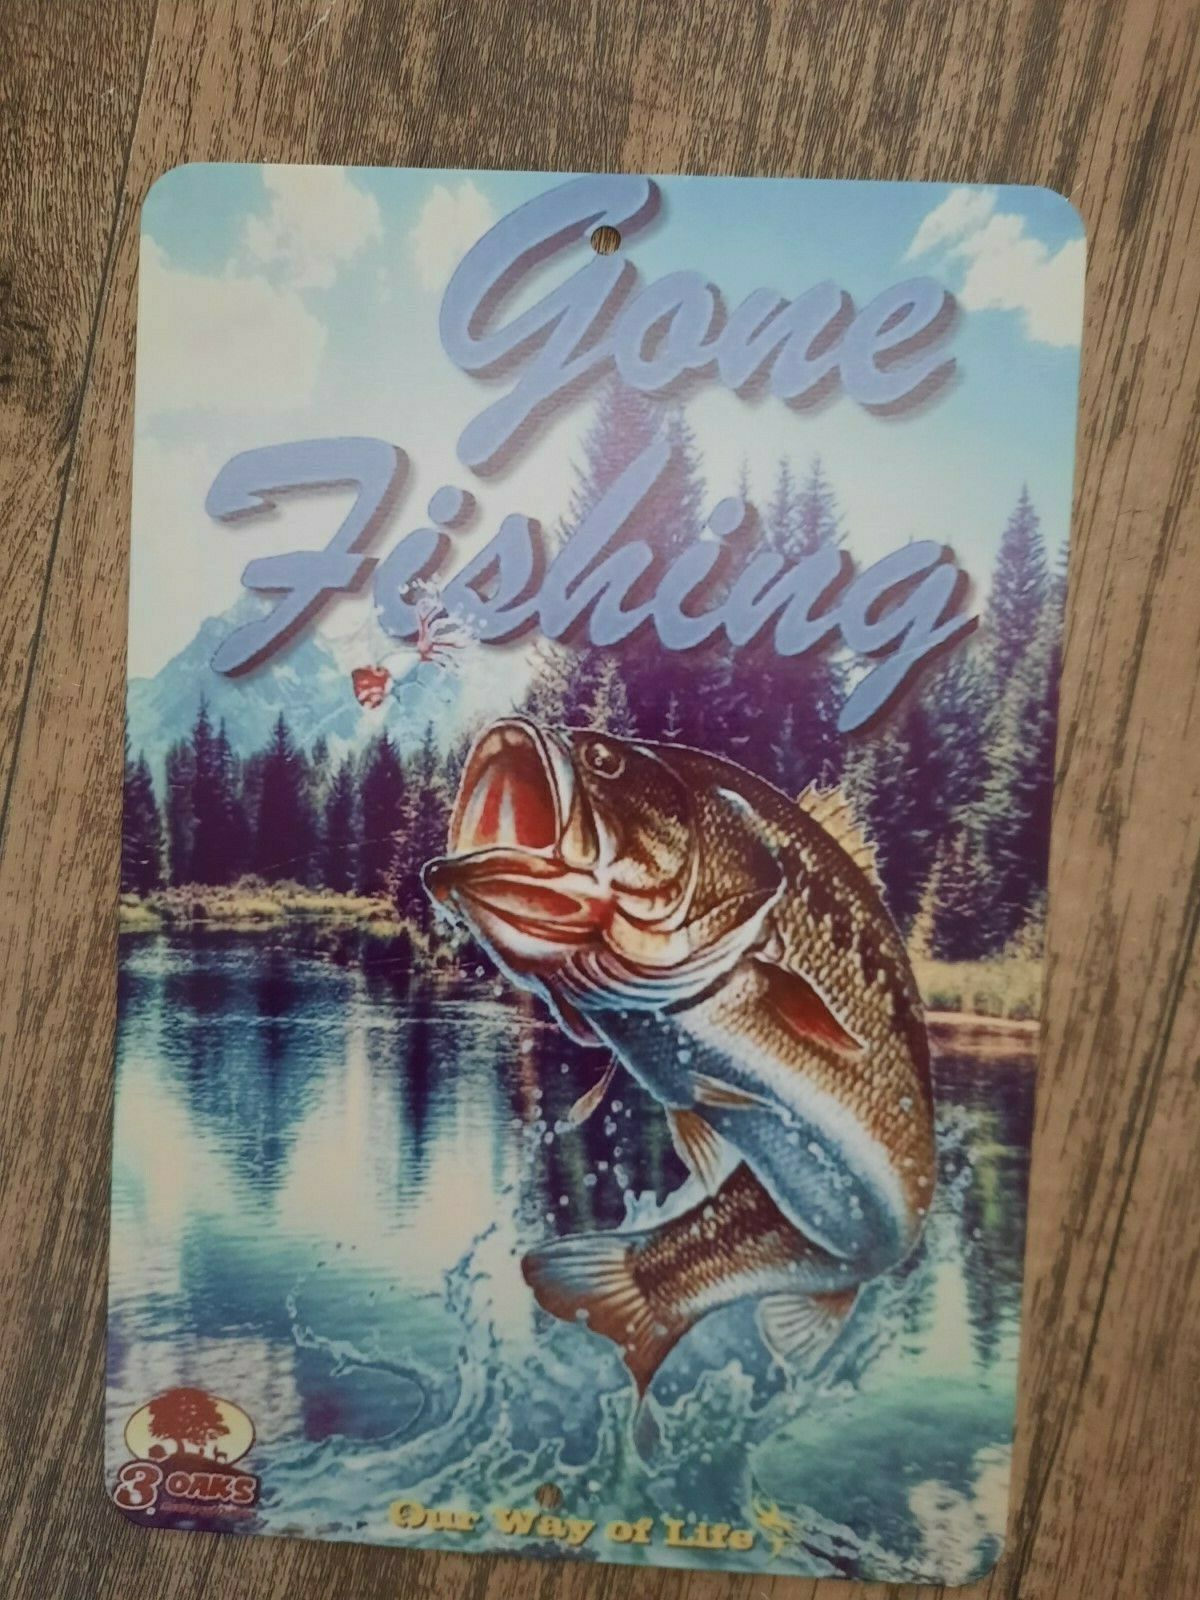 Gone Fishing Wildlife Sporting 8x12 Metal Wall Sign Sports Great Outdoors